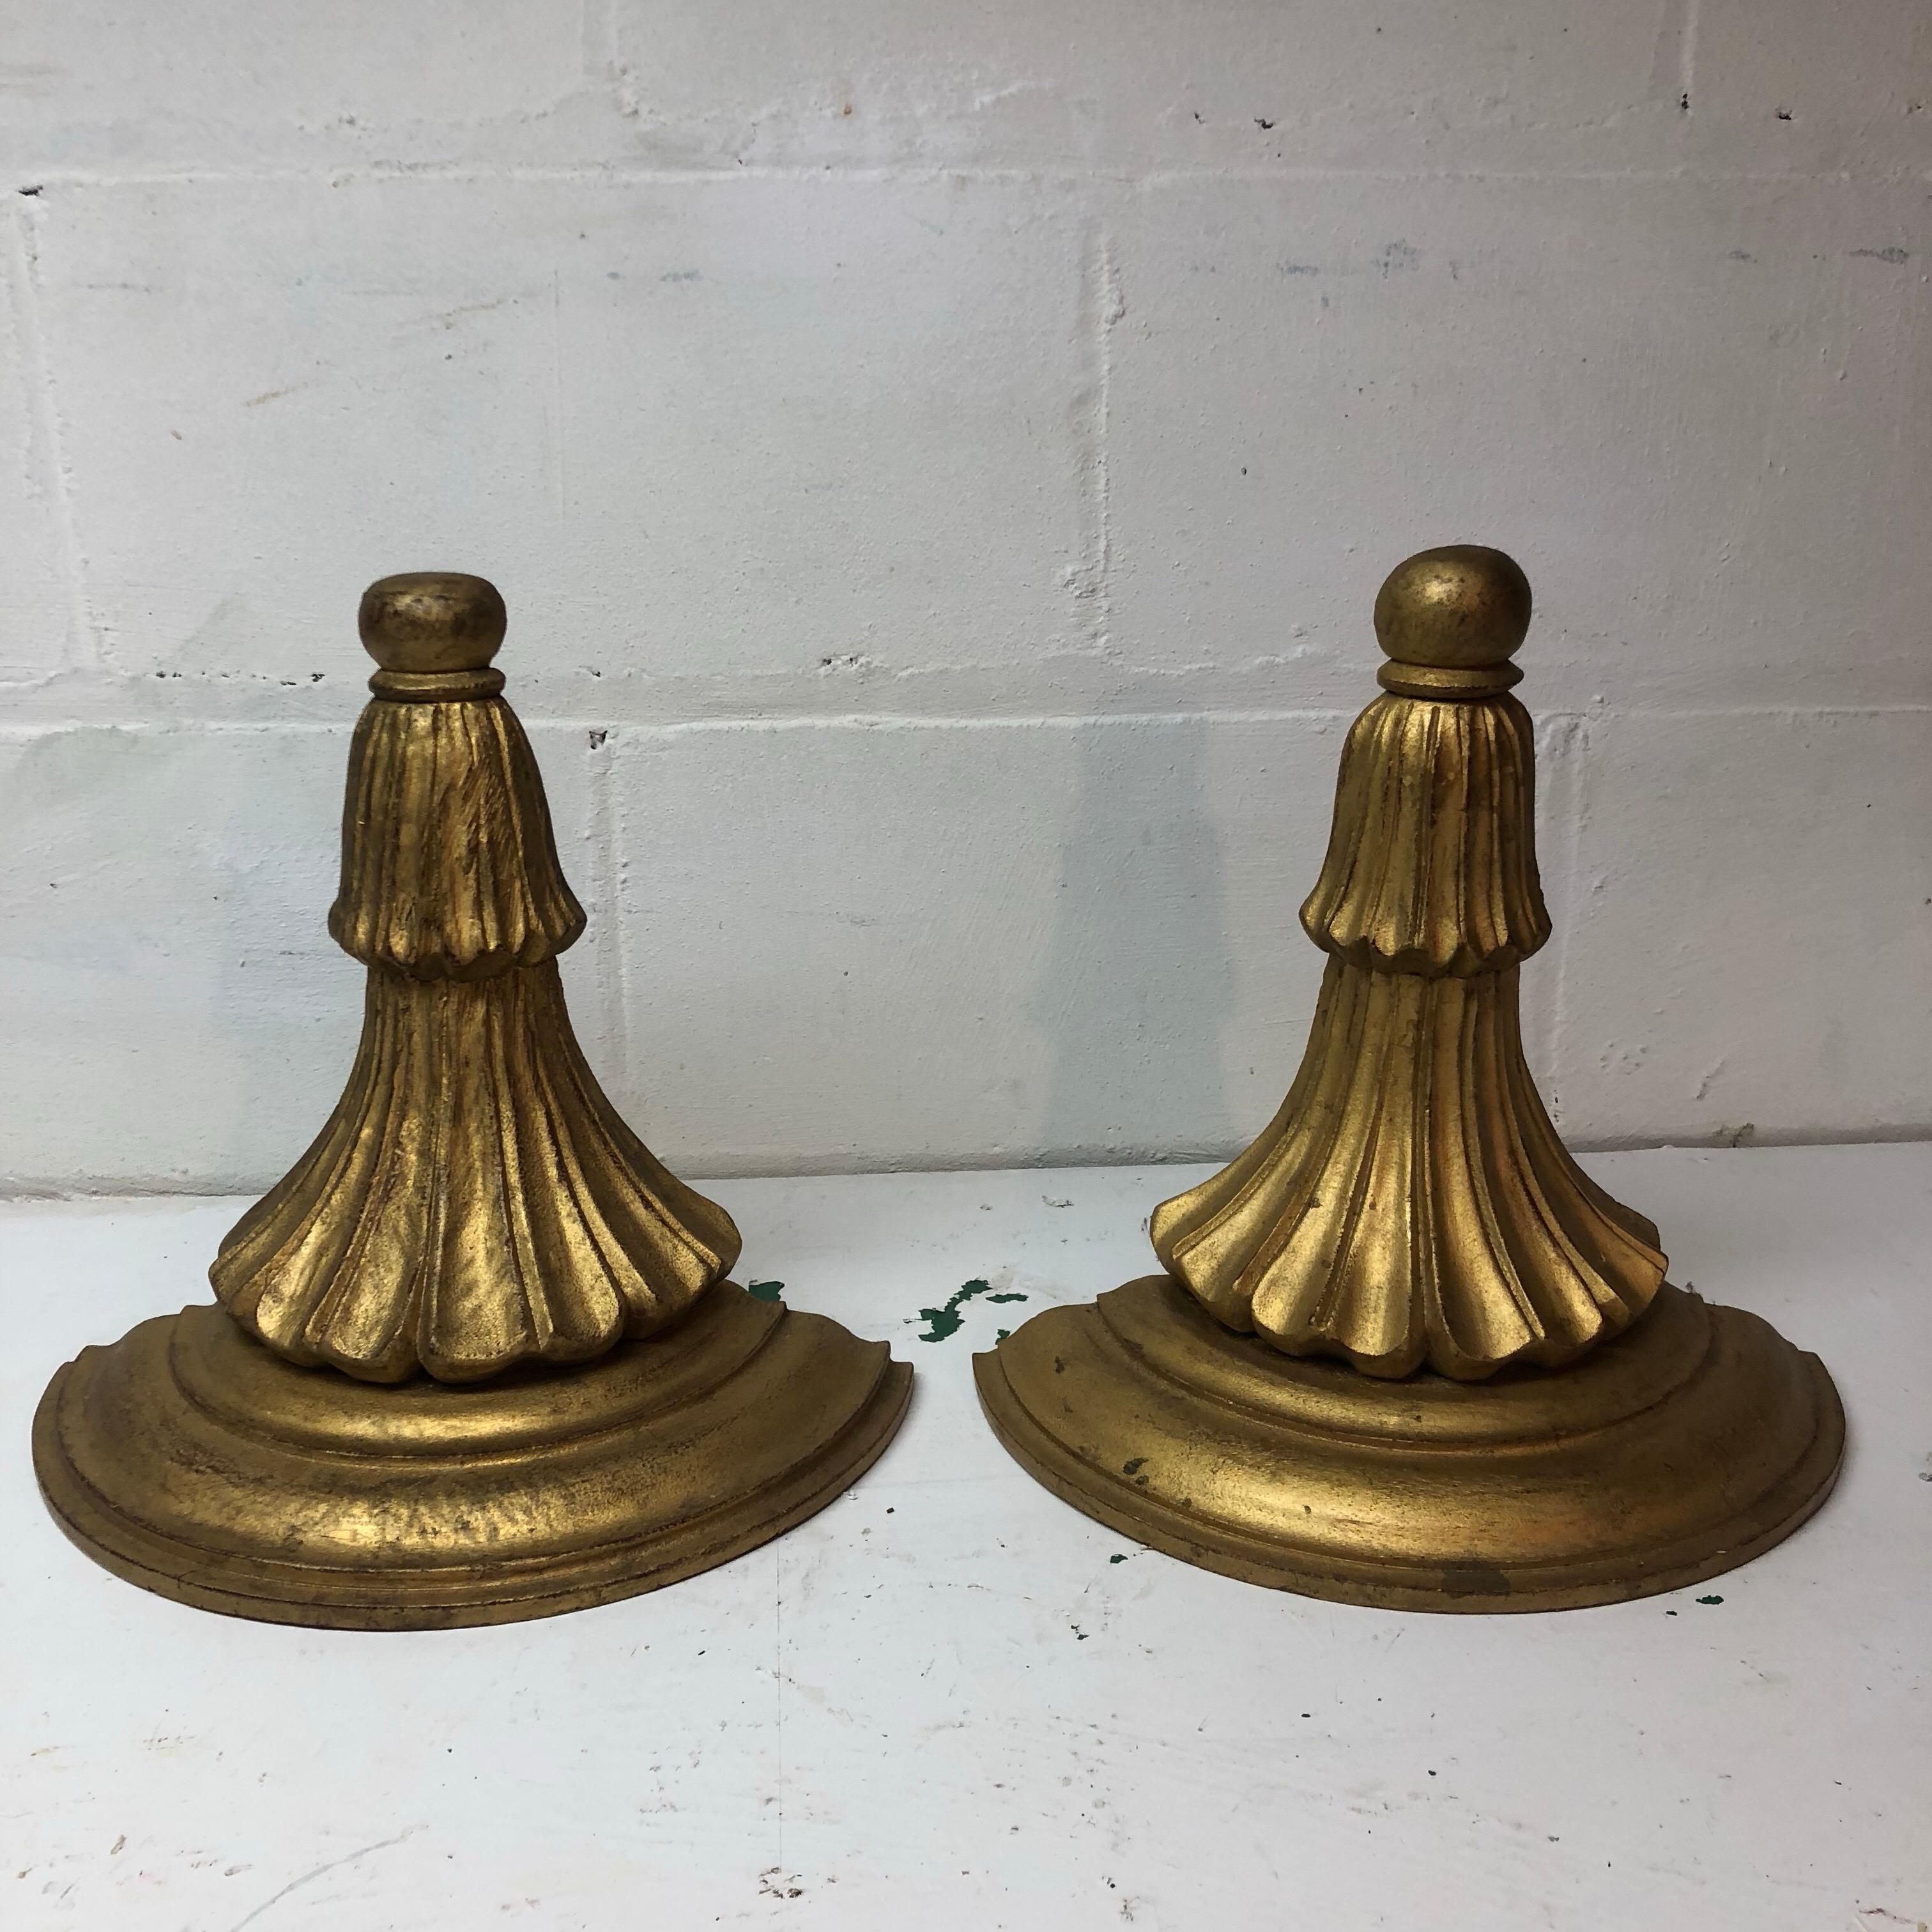 Pair of large gilded wood wall brackets.